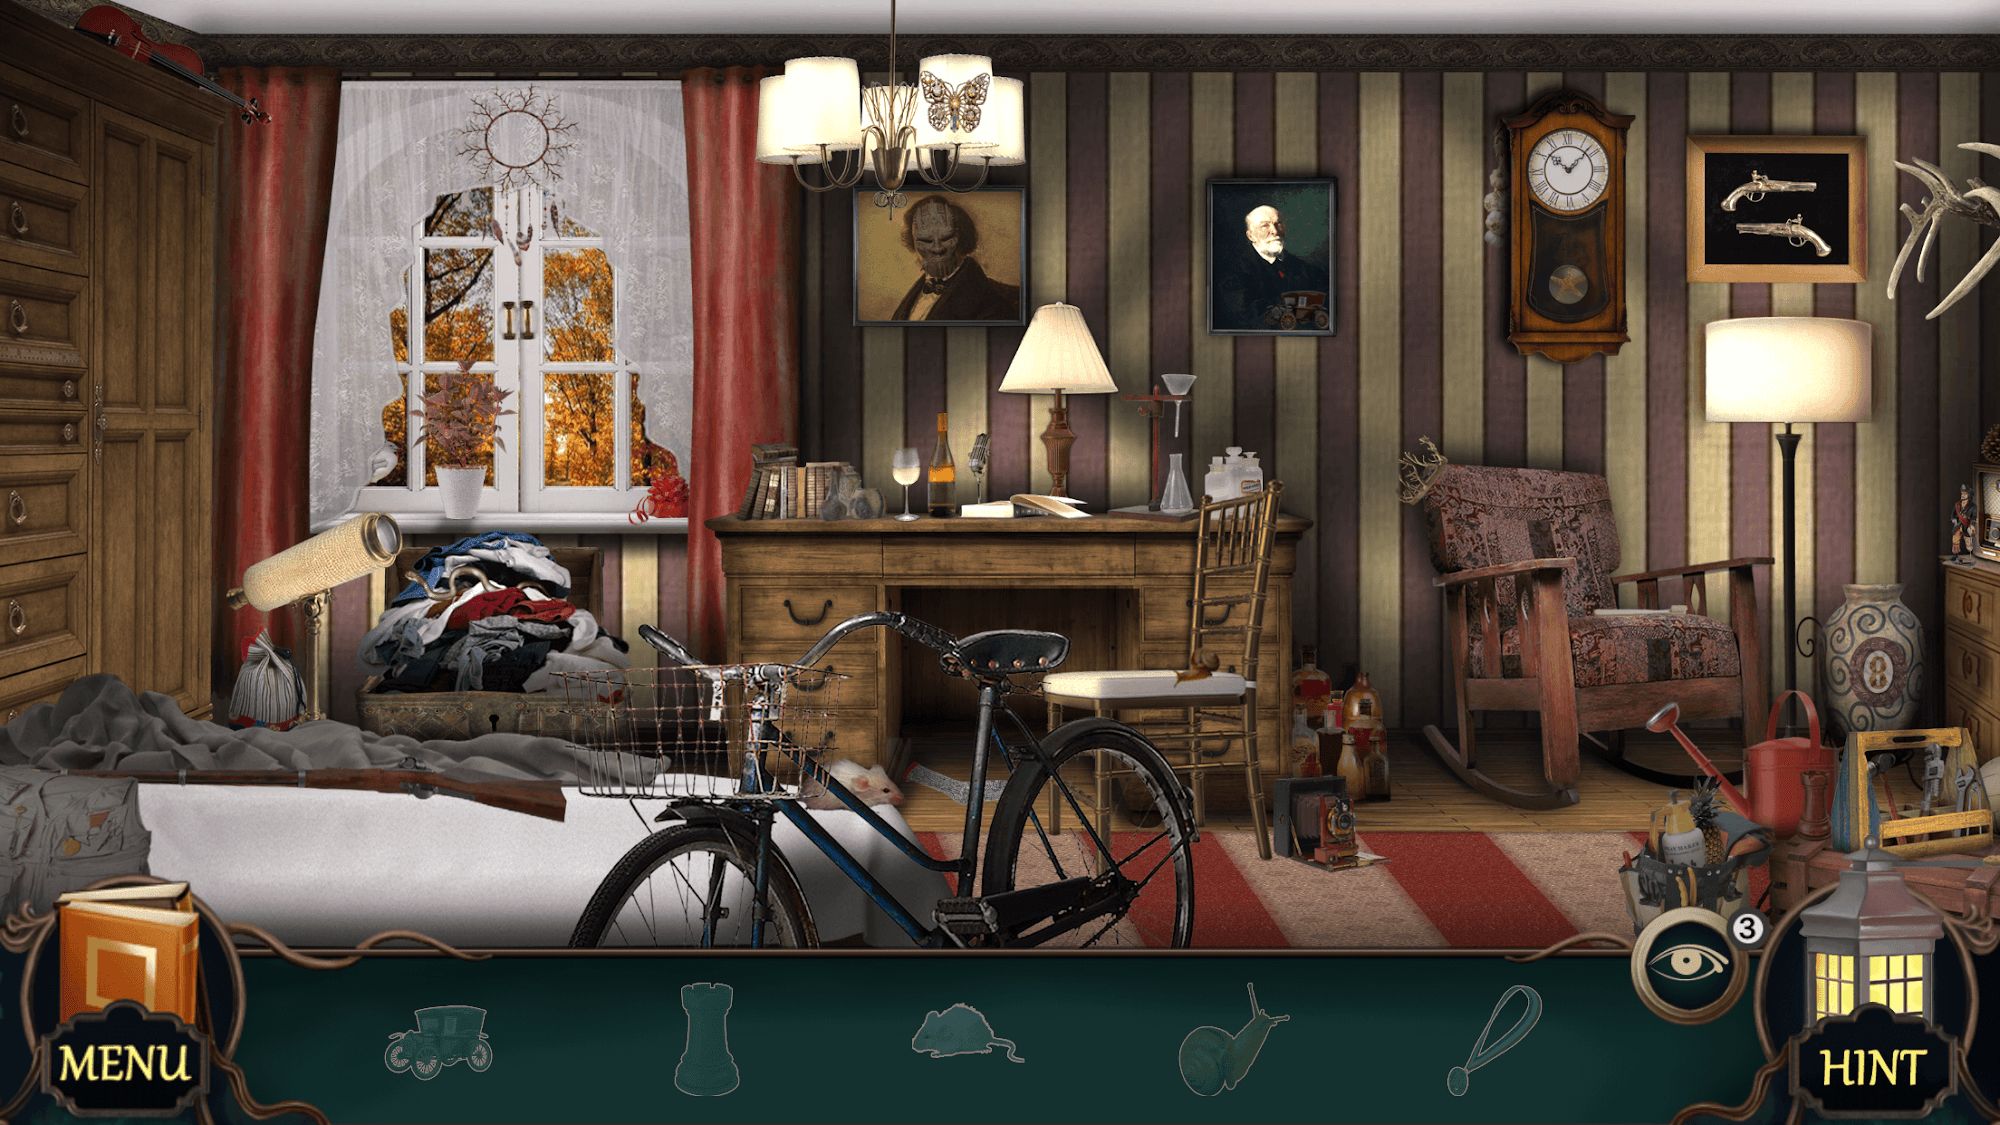 Mystery Hotel - Seek and Find Hidden Objects Games for Android